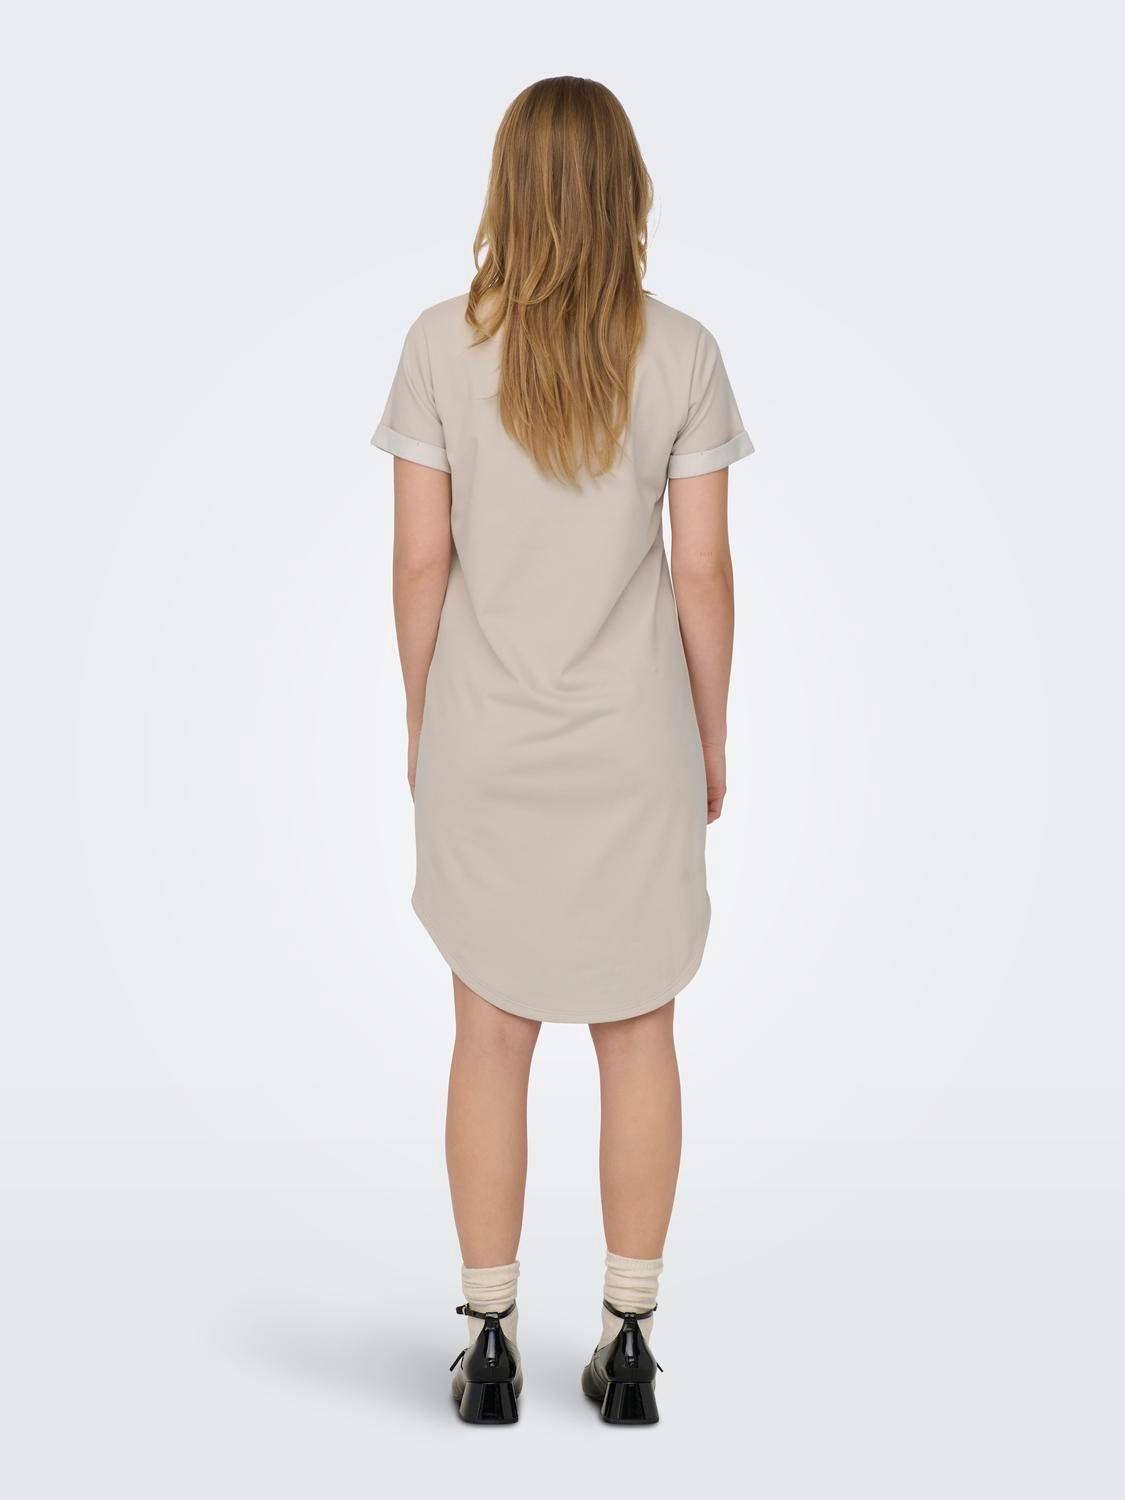 ONLY Short T-shirt Dress -Chateau Gray - 15174793